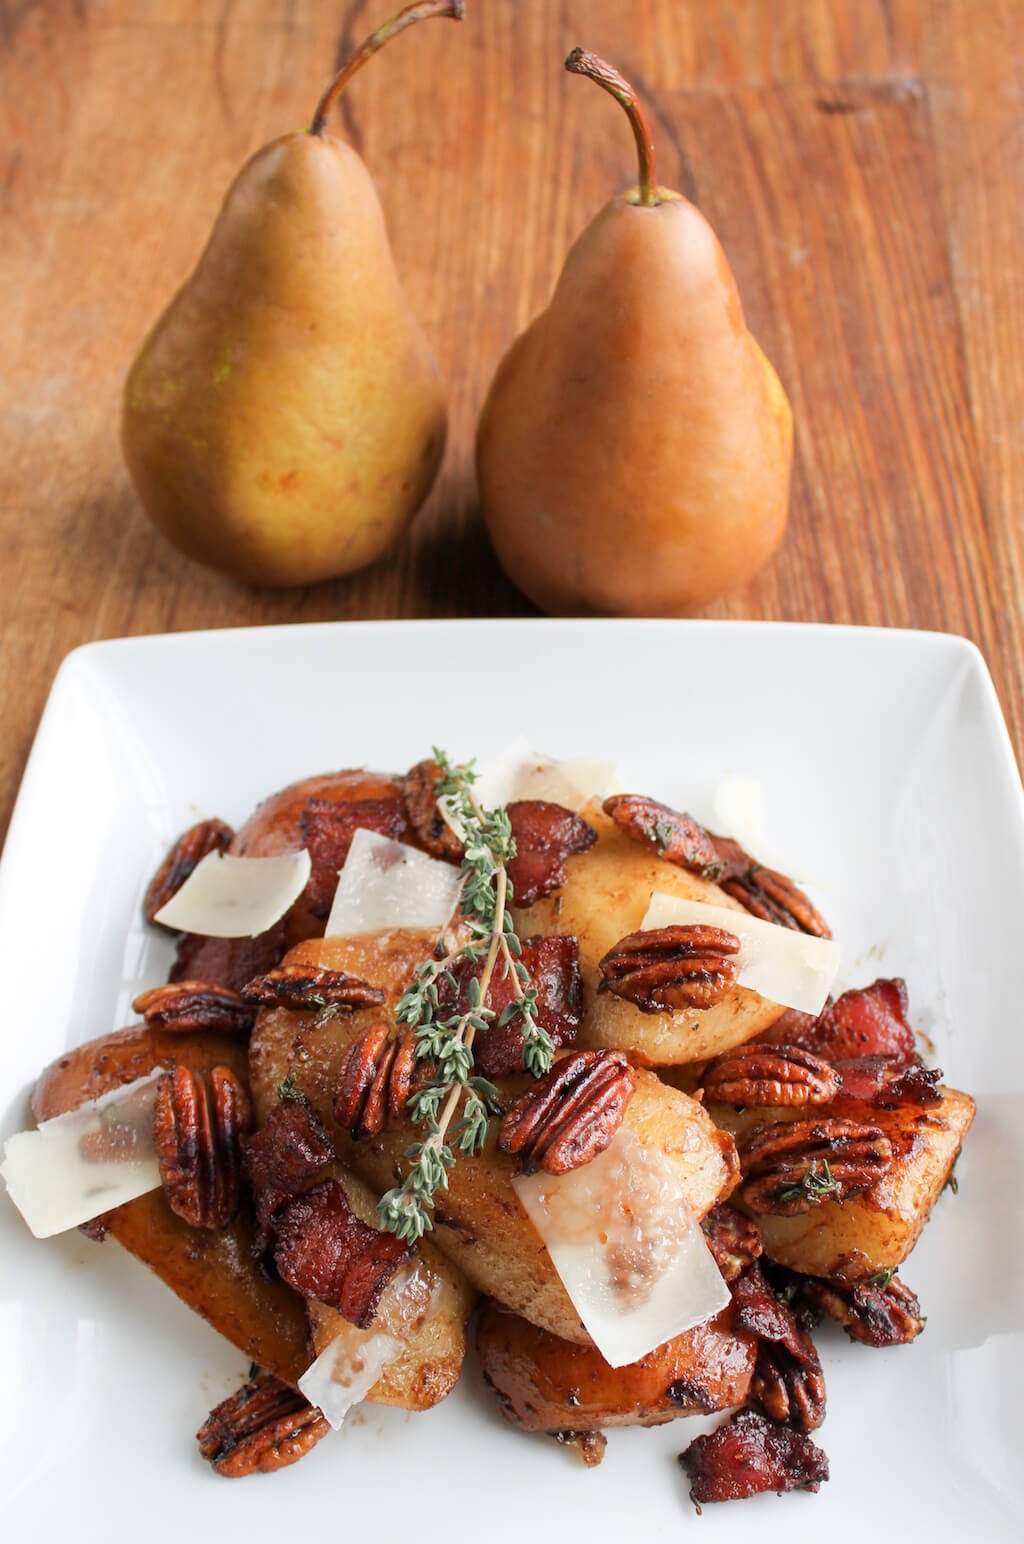 Savory Bosc Pear Salad with Bacon & Toasted Pecans